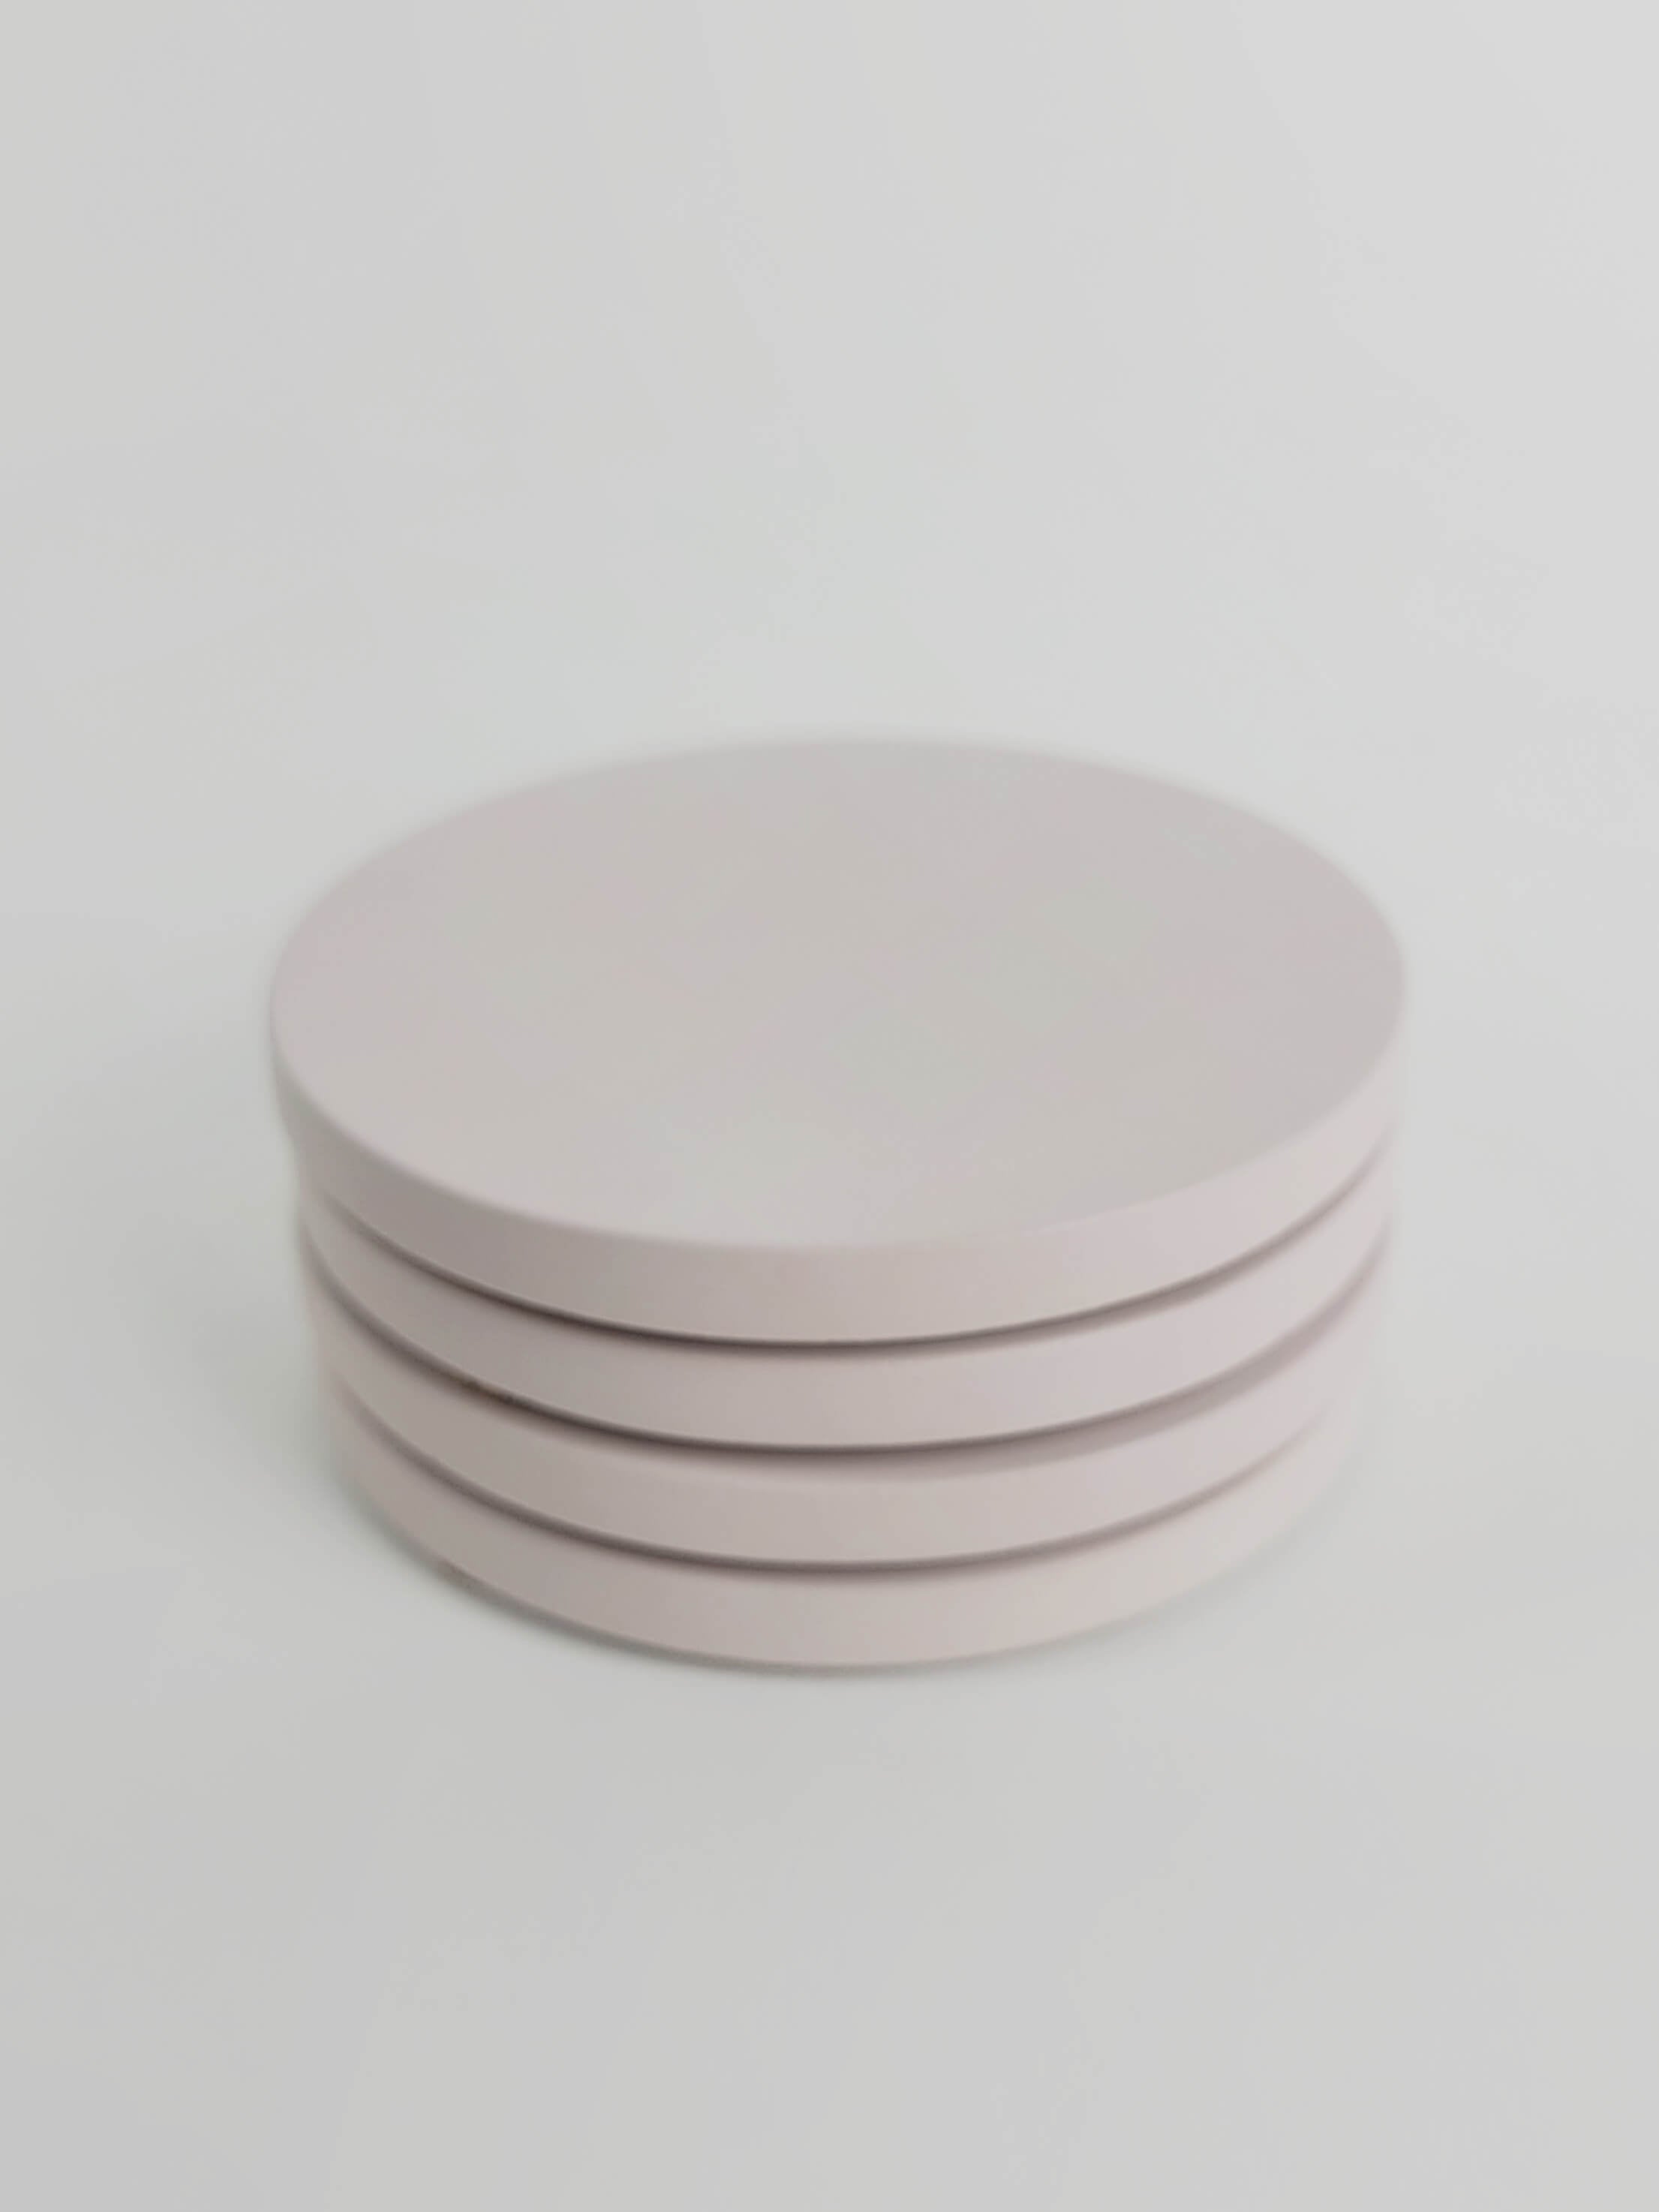 Four pastel pink concrete coasters neatly stacked, highlighting their smooth finish and elegant design.